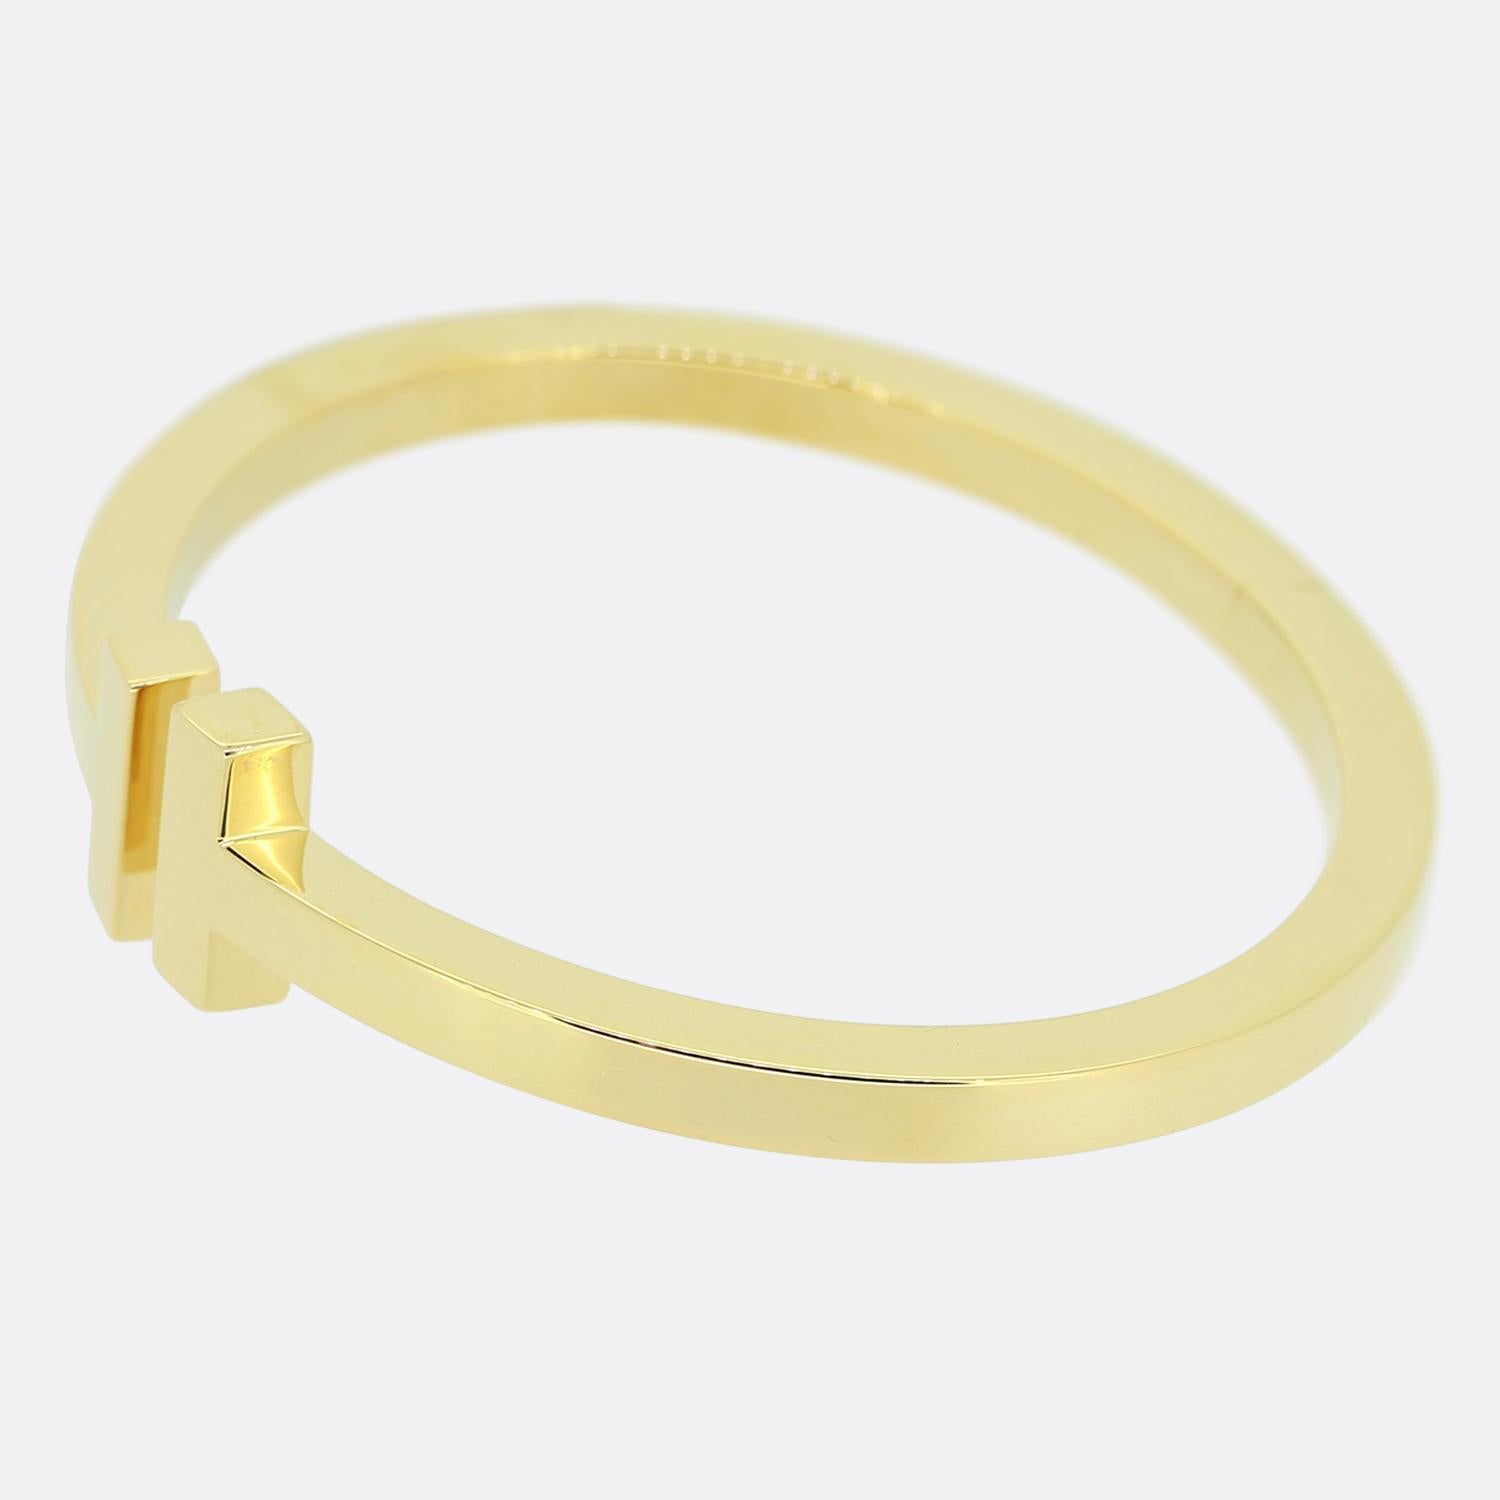 Here we have a wonderful bangle from the world renowned jewellery designer, Tiffany & Co. From the Tiffany T collection, this sleek 18ct yellow gold bracelet features the signature T design enhanced with plain polished finish and a hinged mechanism